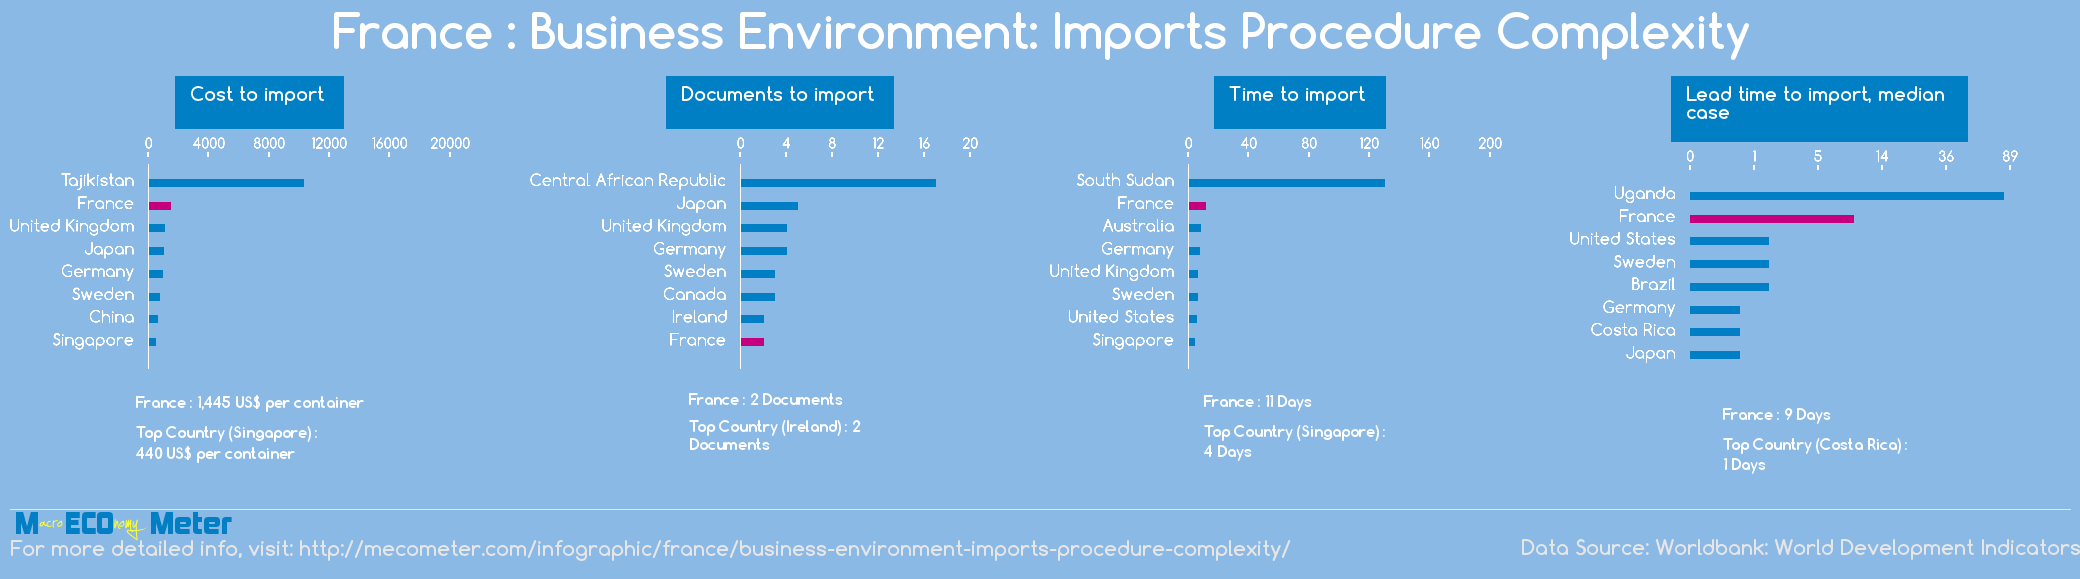 France : Business Environment: Imports Procedure Complexity